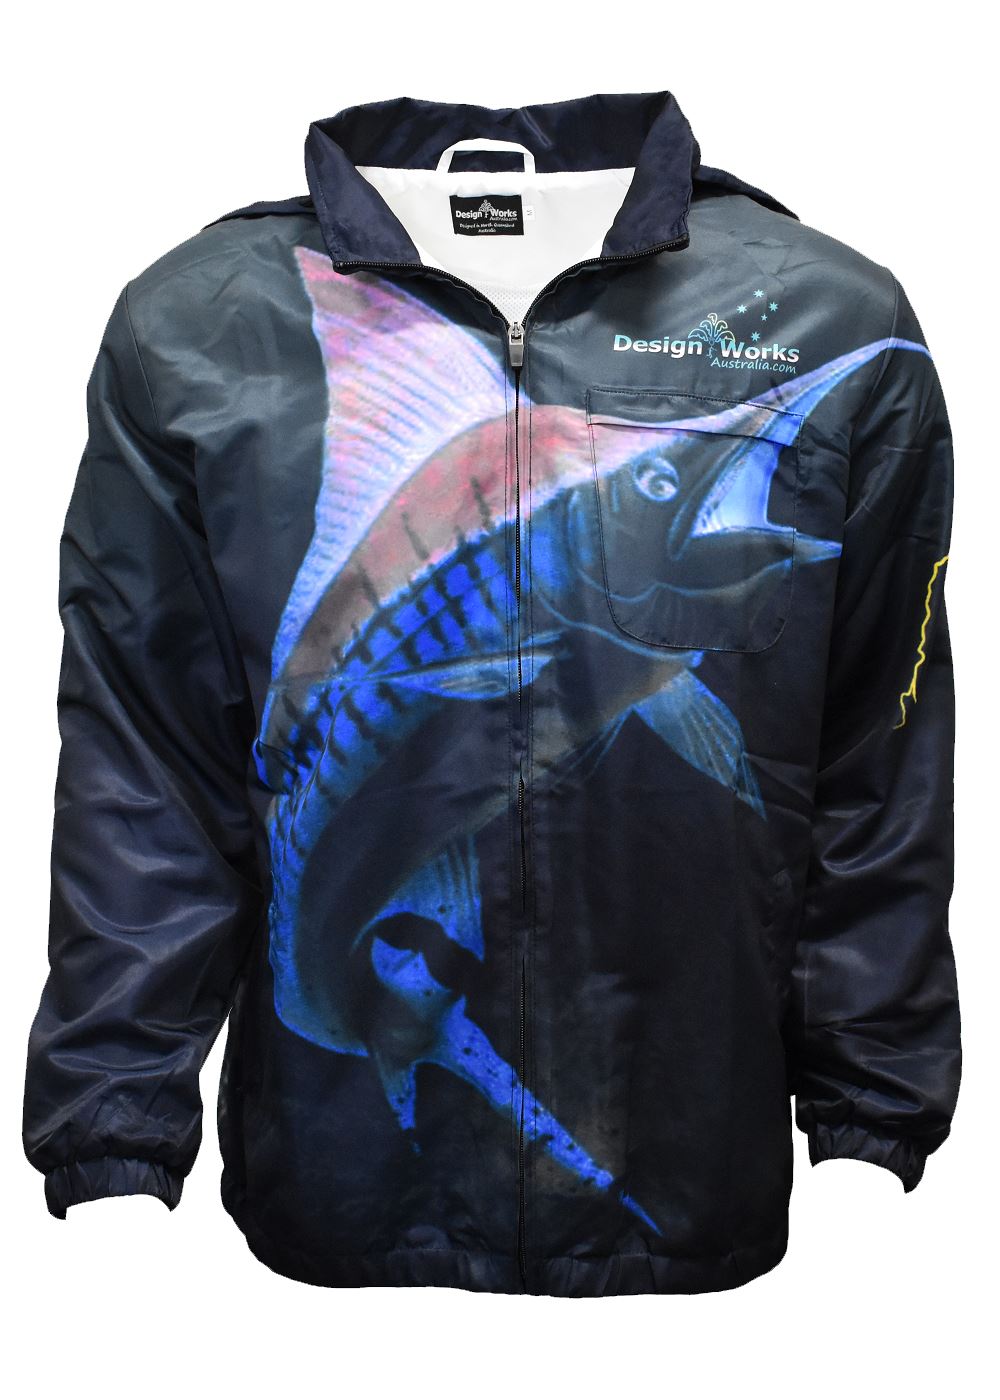 UV Protective Packaway Fishing Jacket - The Game